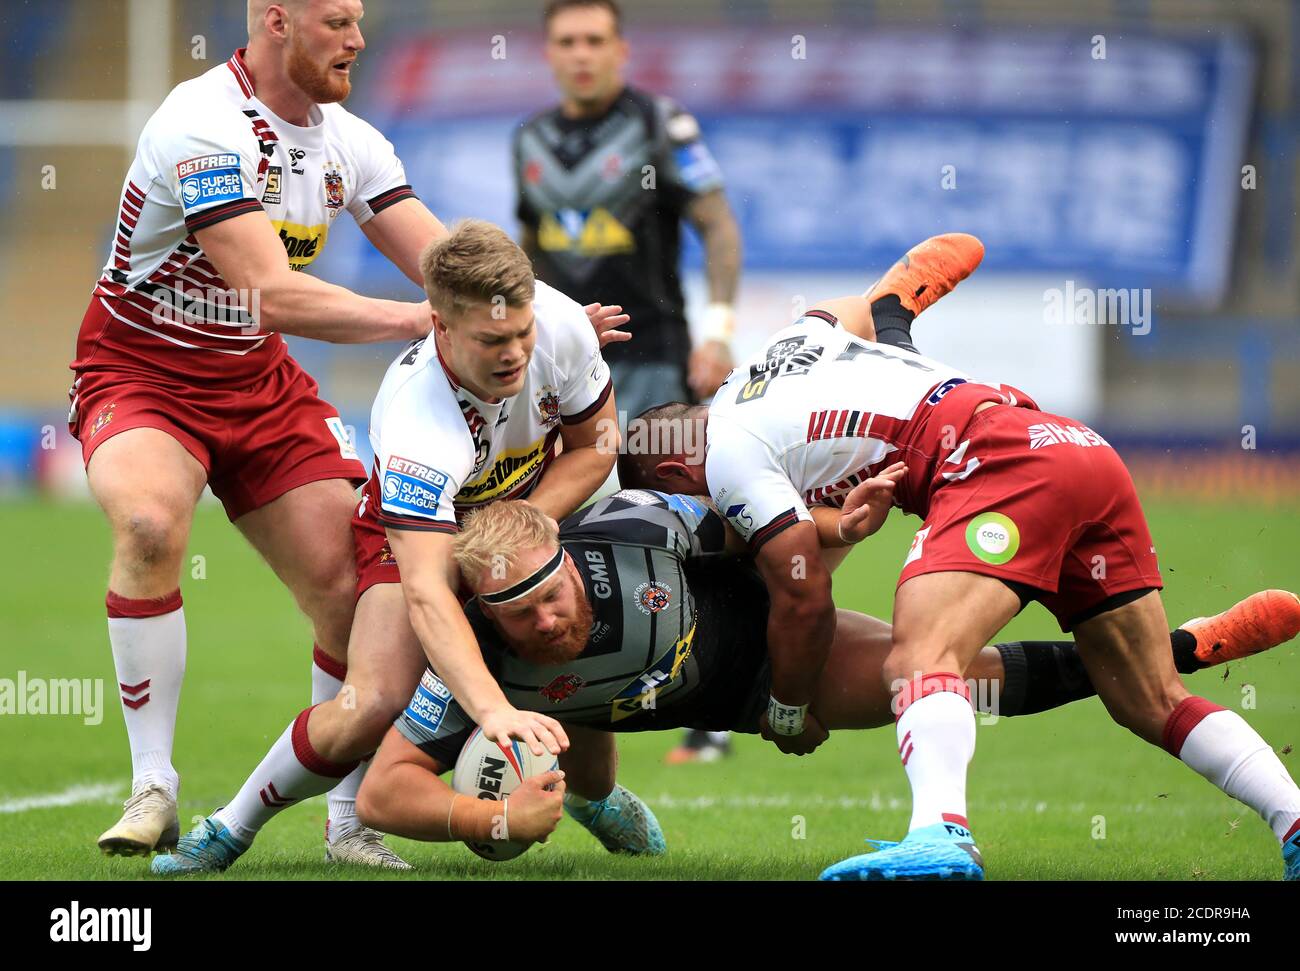 Castleford Tigers Oliver Holmes (centre) is tackled by Wigan Warriors Morgan Smithies (left) and Thomas Leuluai during the Super League match at the Halliwell Jones Stadium, Warrington Stock Photo